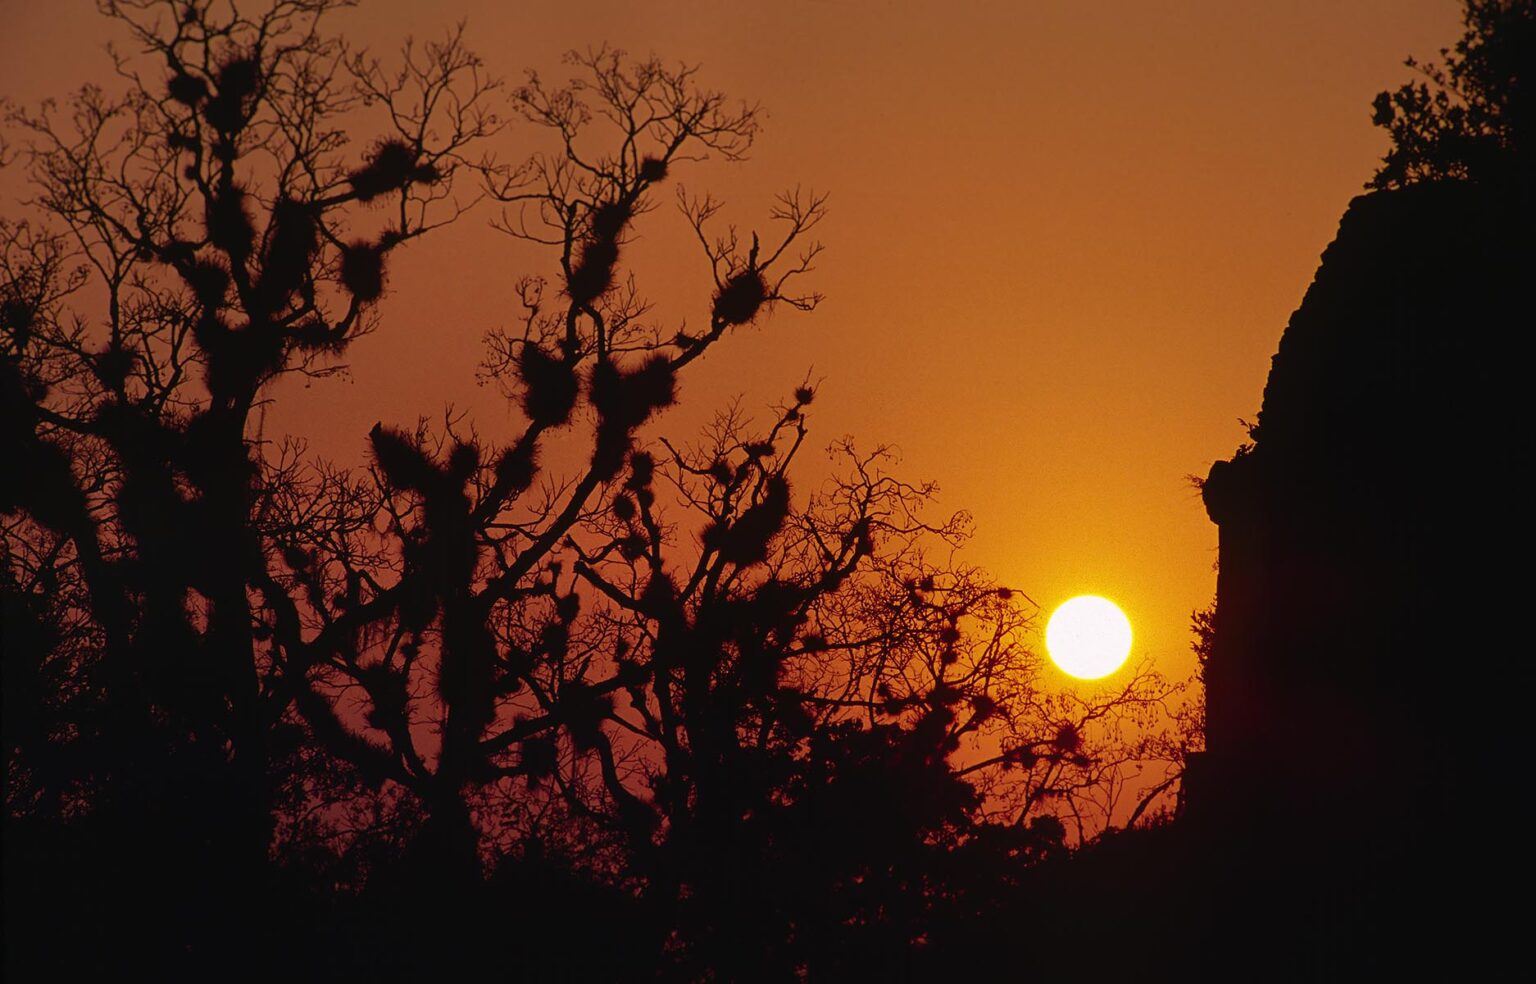 JUNGLE trees supporting BROMELIAD communities silhouetted by the ORANGE SUNSET - TIKAL RUINS, GUATEMALA